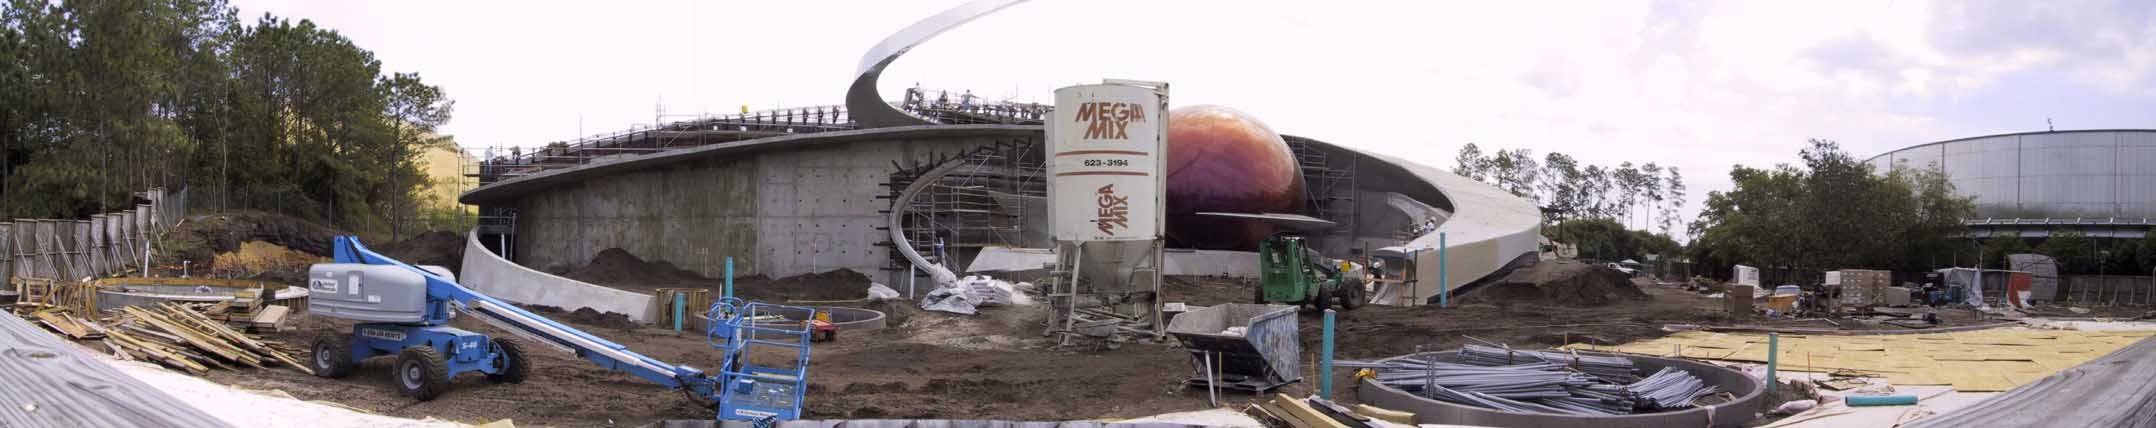 Disney press photos of Mission SPACE